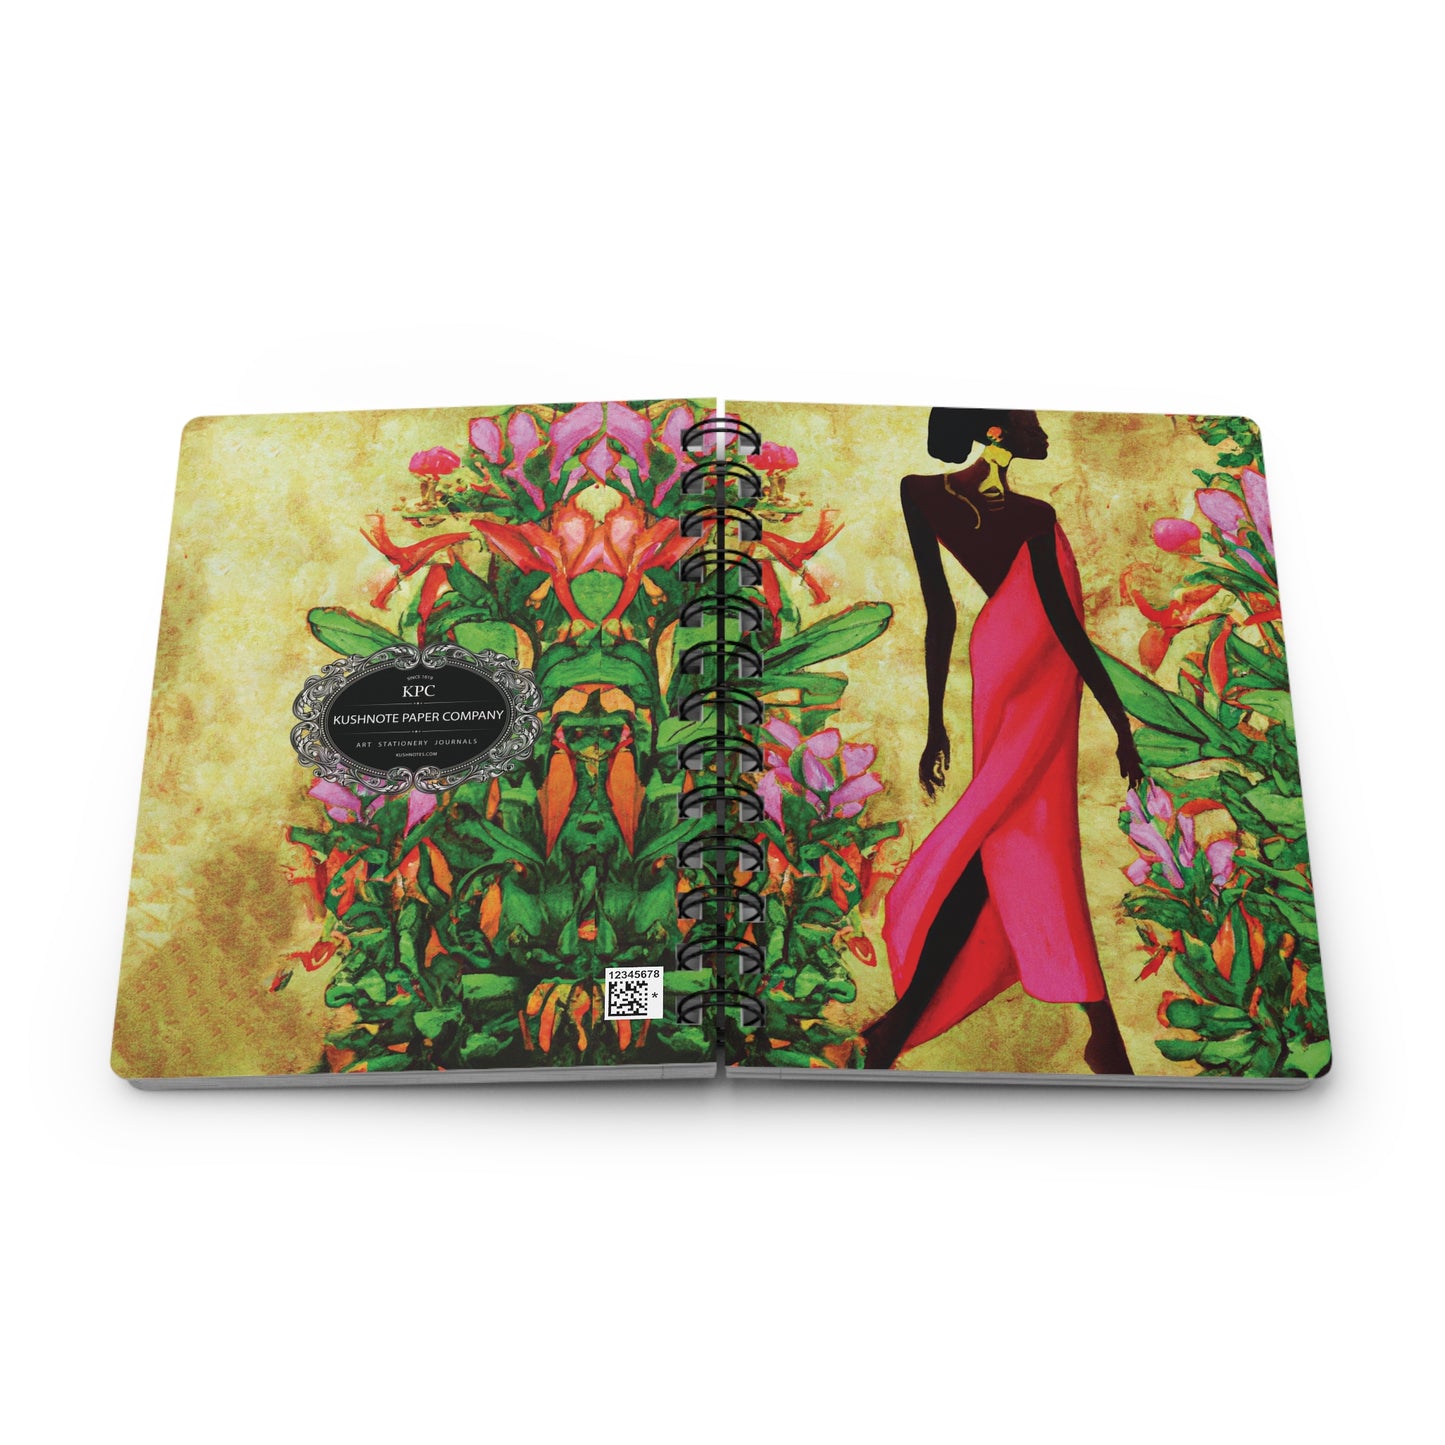 Enchanted Gardens Spiral Bound Notebooks and Journals with 2023-2024 Year-at-a-Glance Calendar